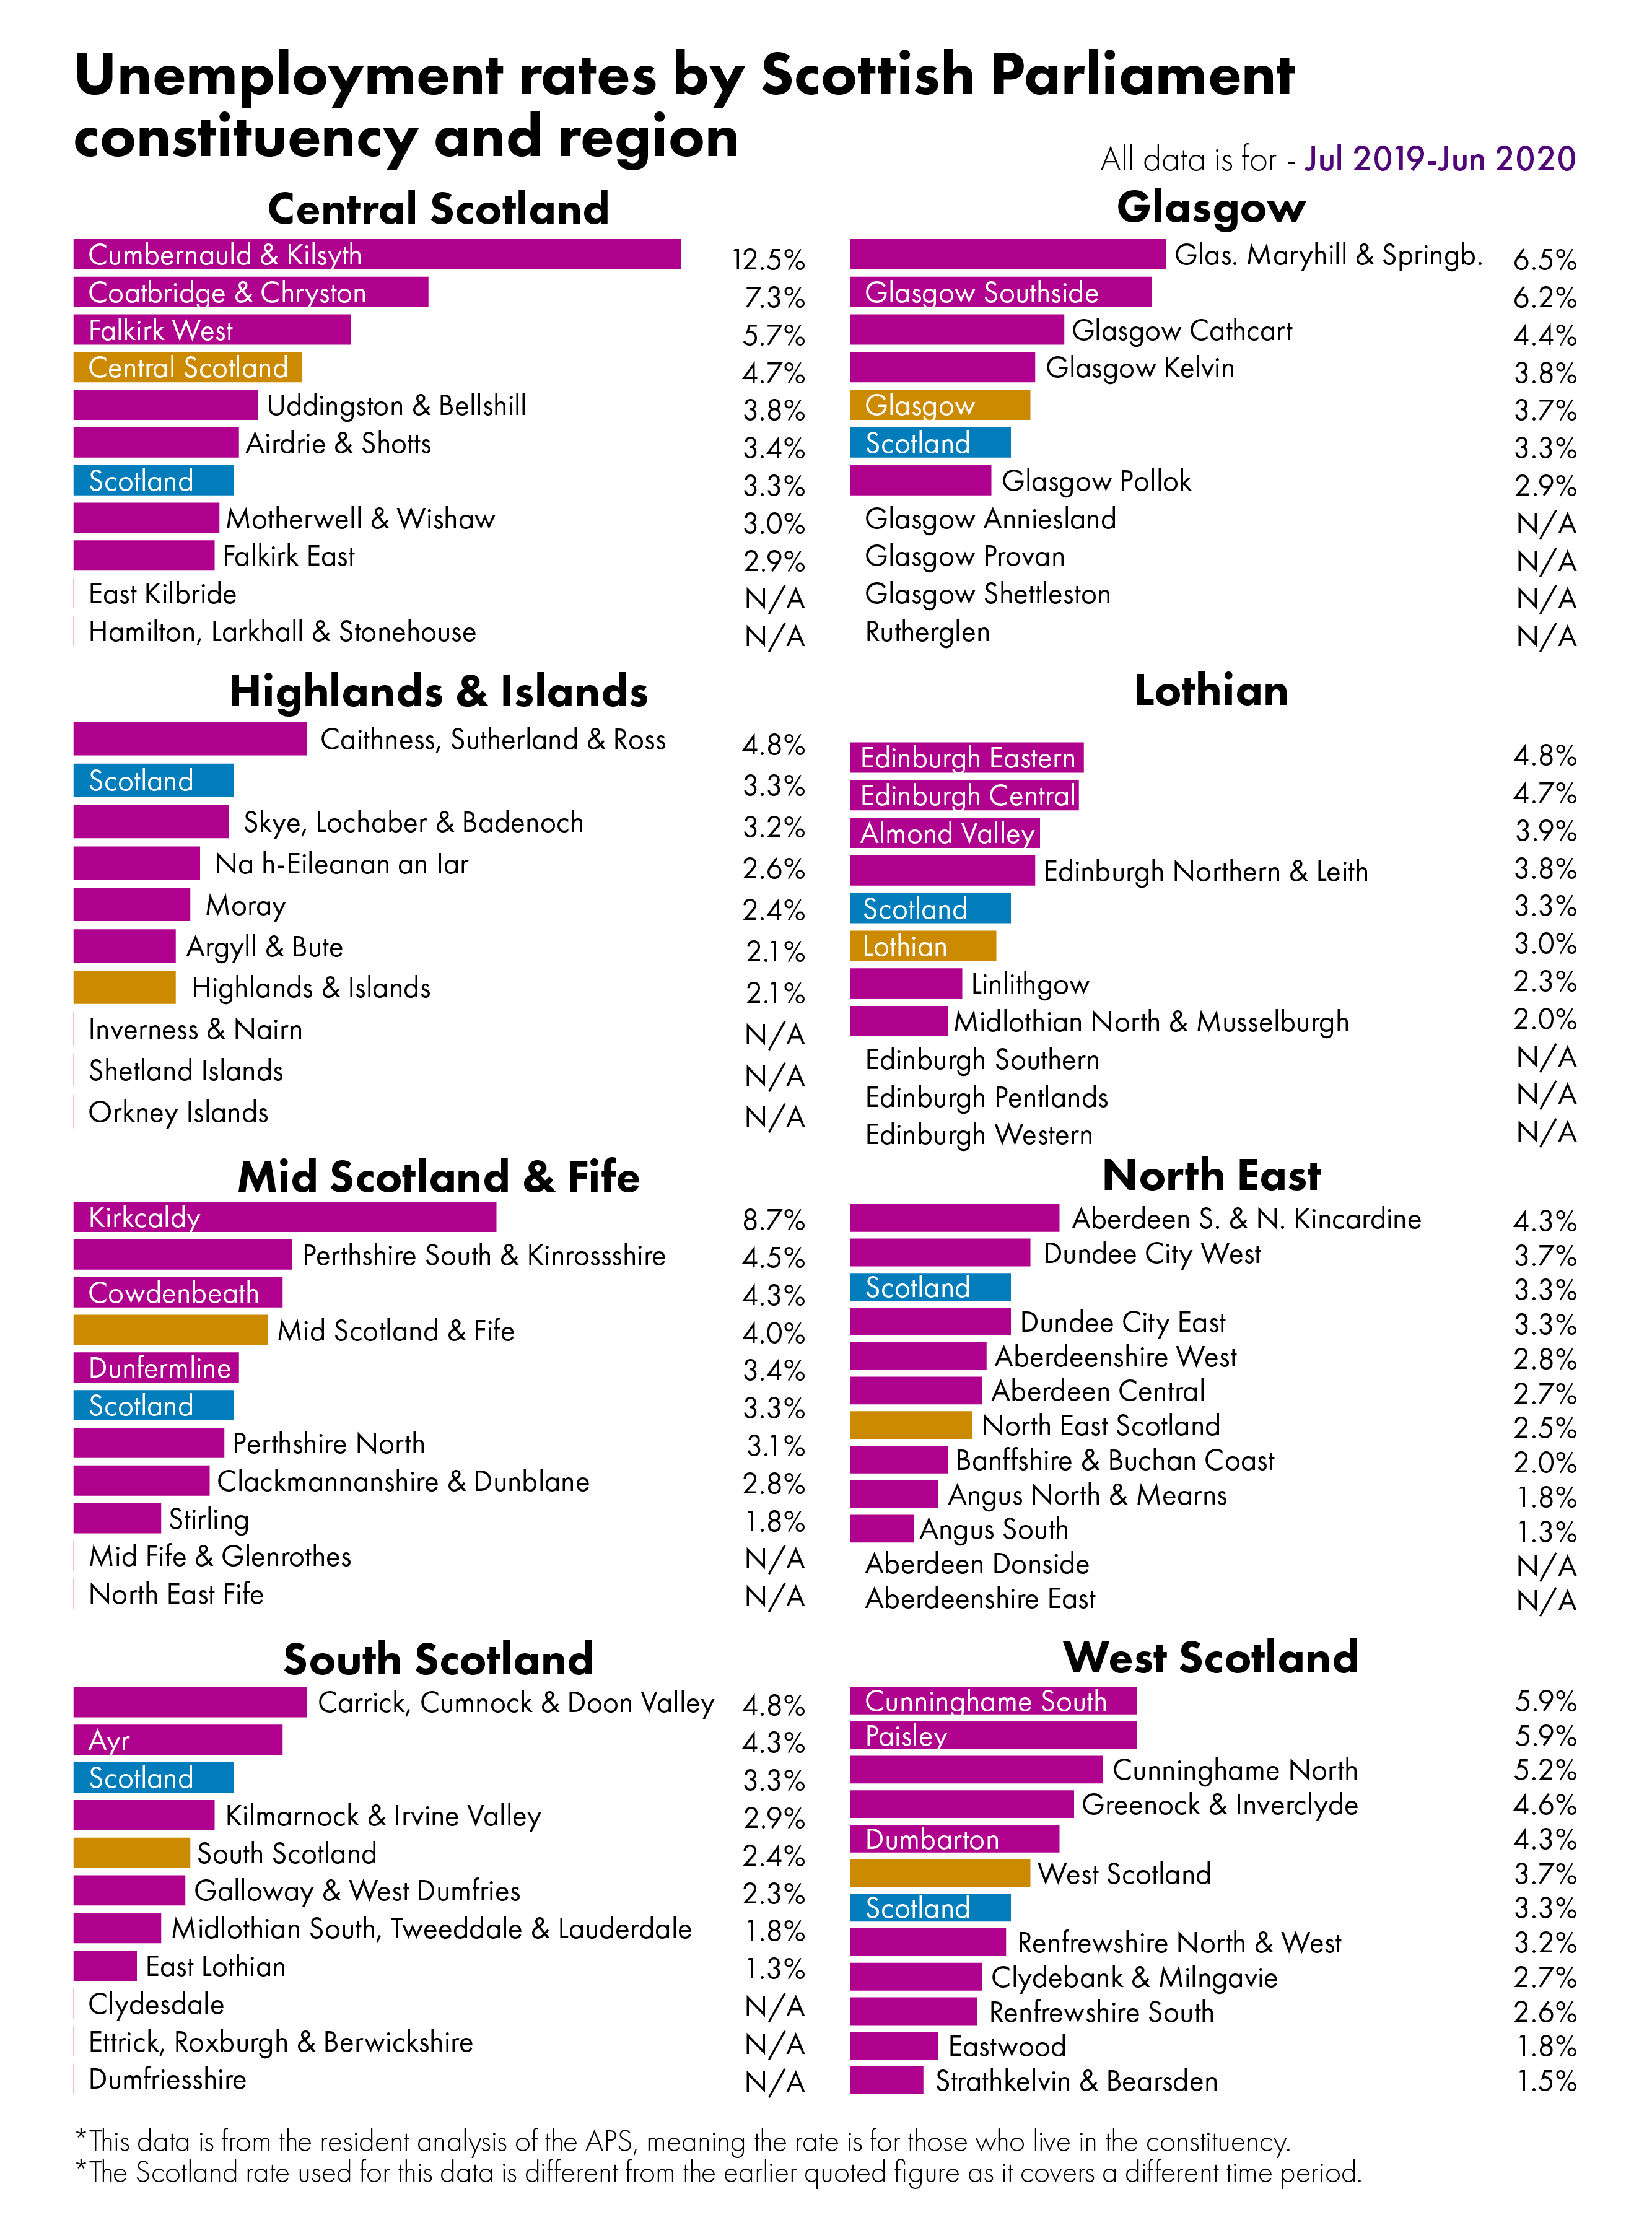 Unemployment rates by Scottish Parliament constituency. Data available on the Scottish Parliament website via the link below.